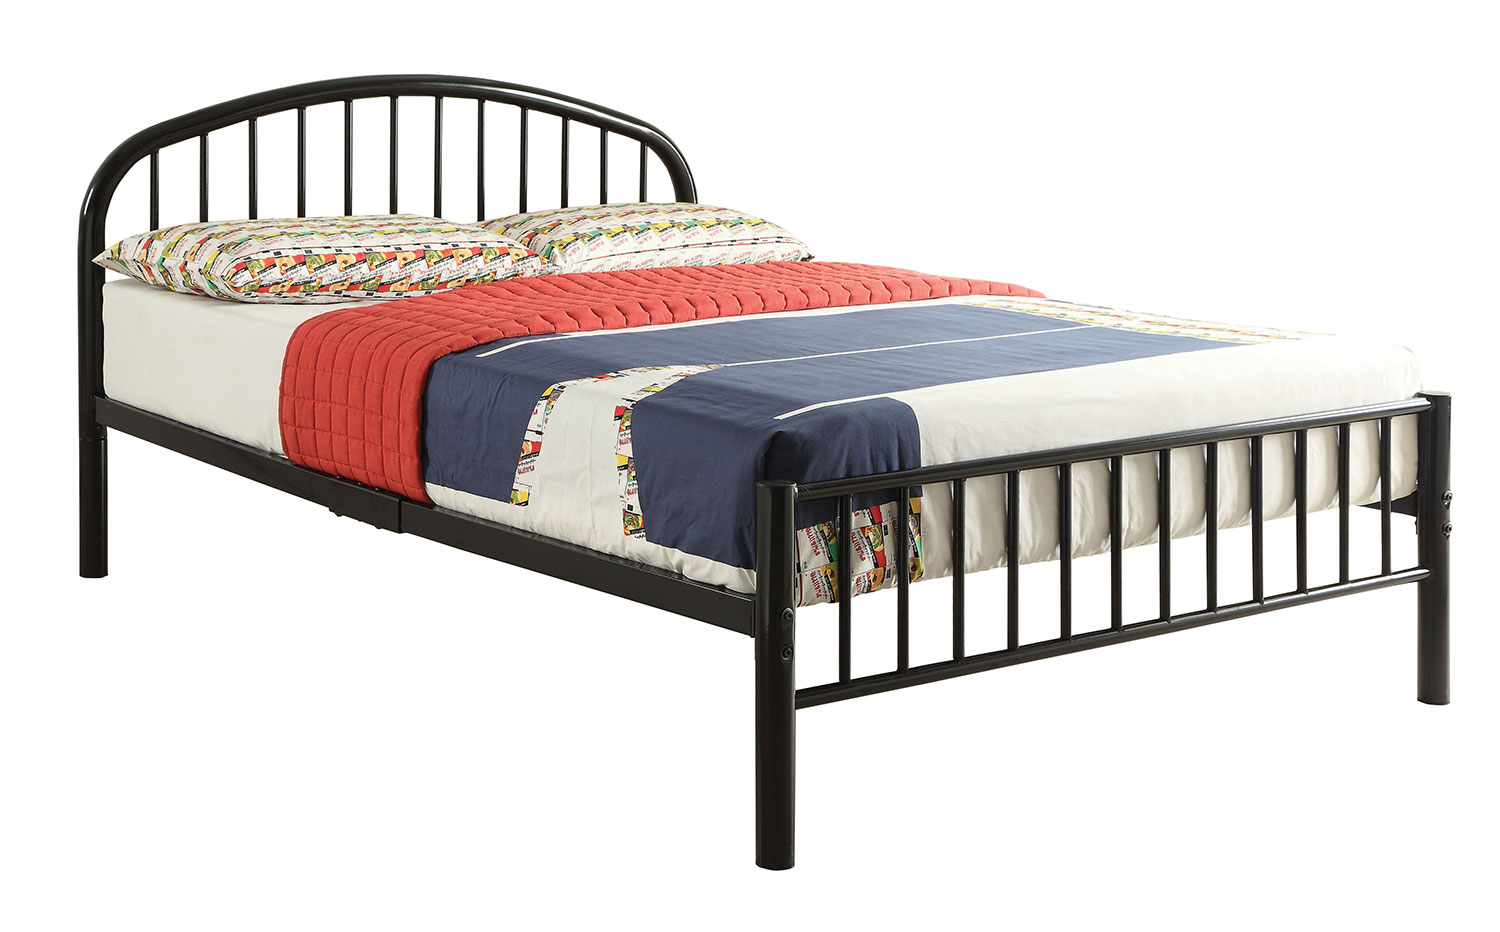 Acme Cailyn Bed - Black